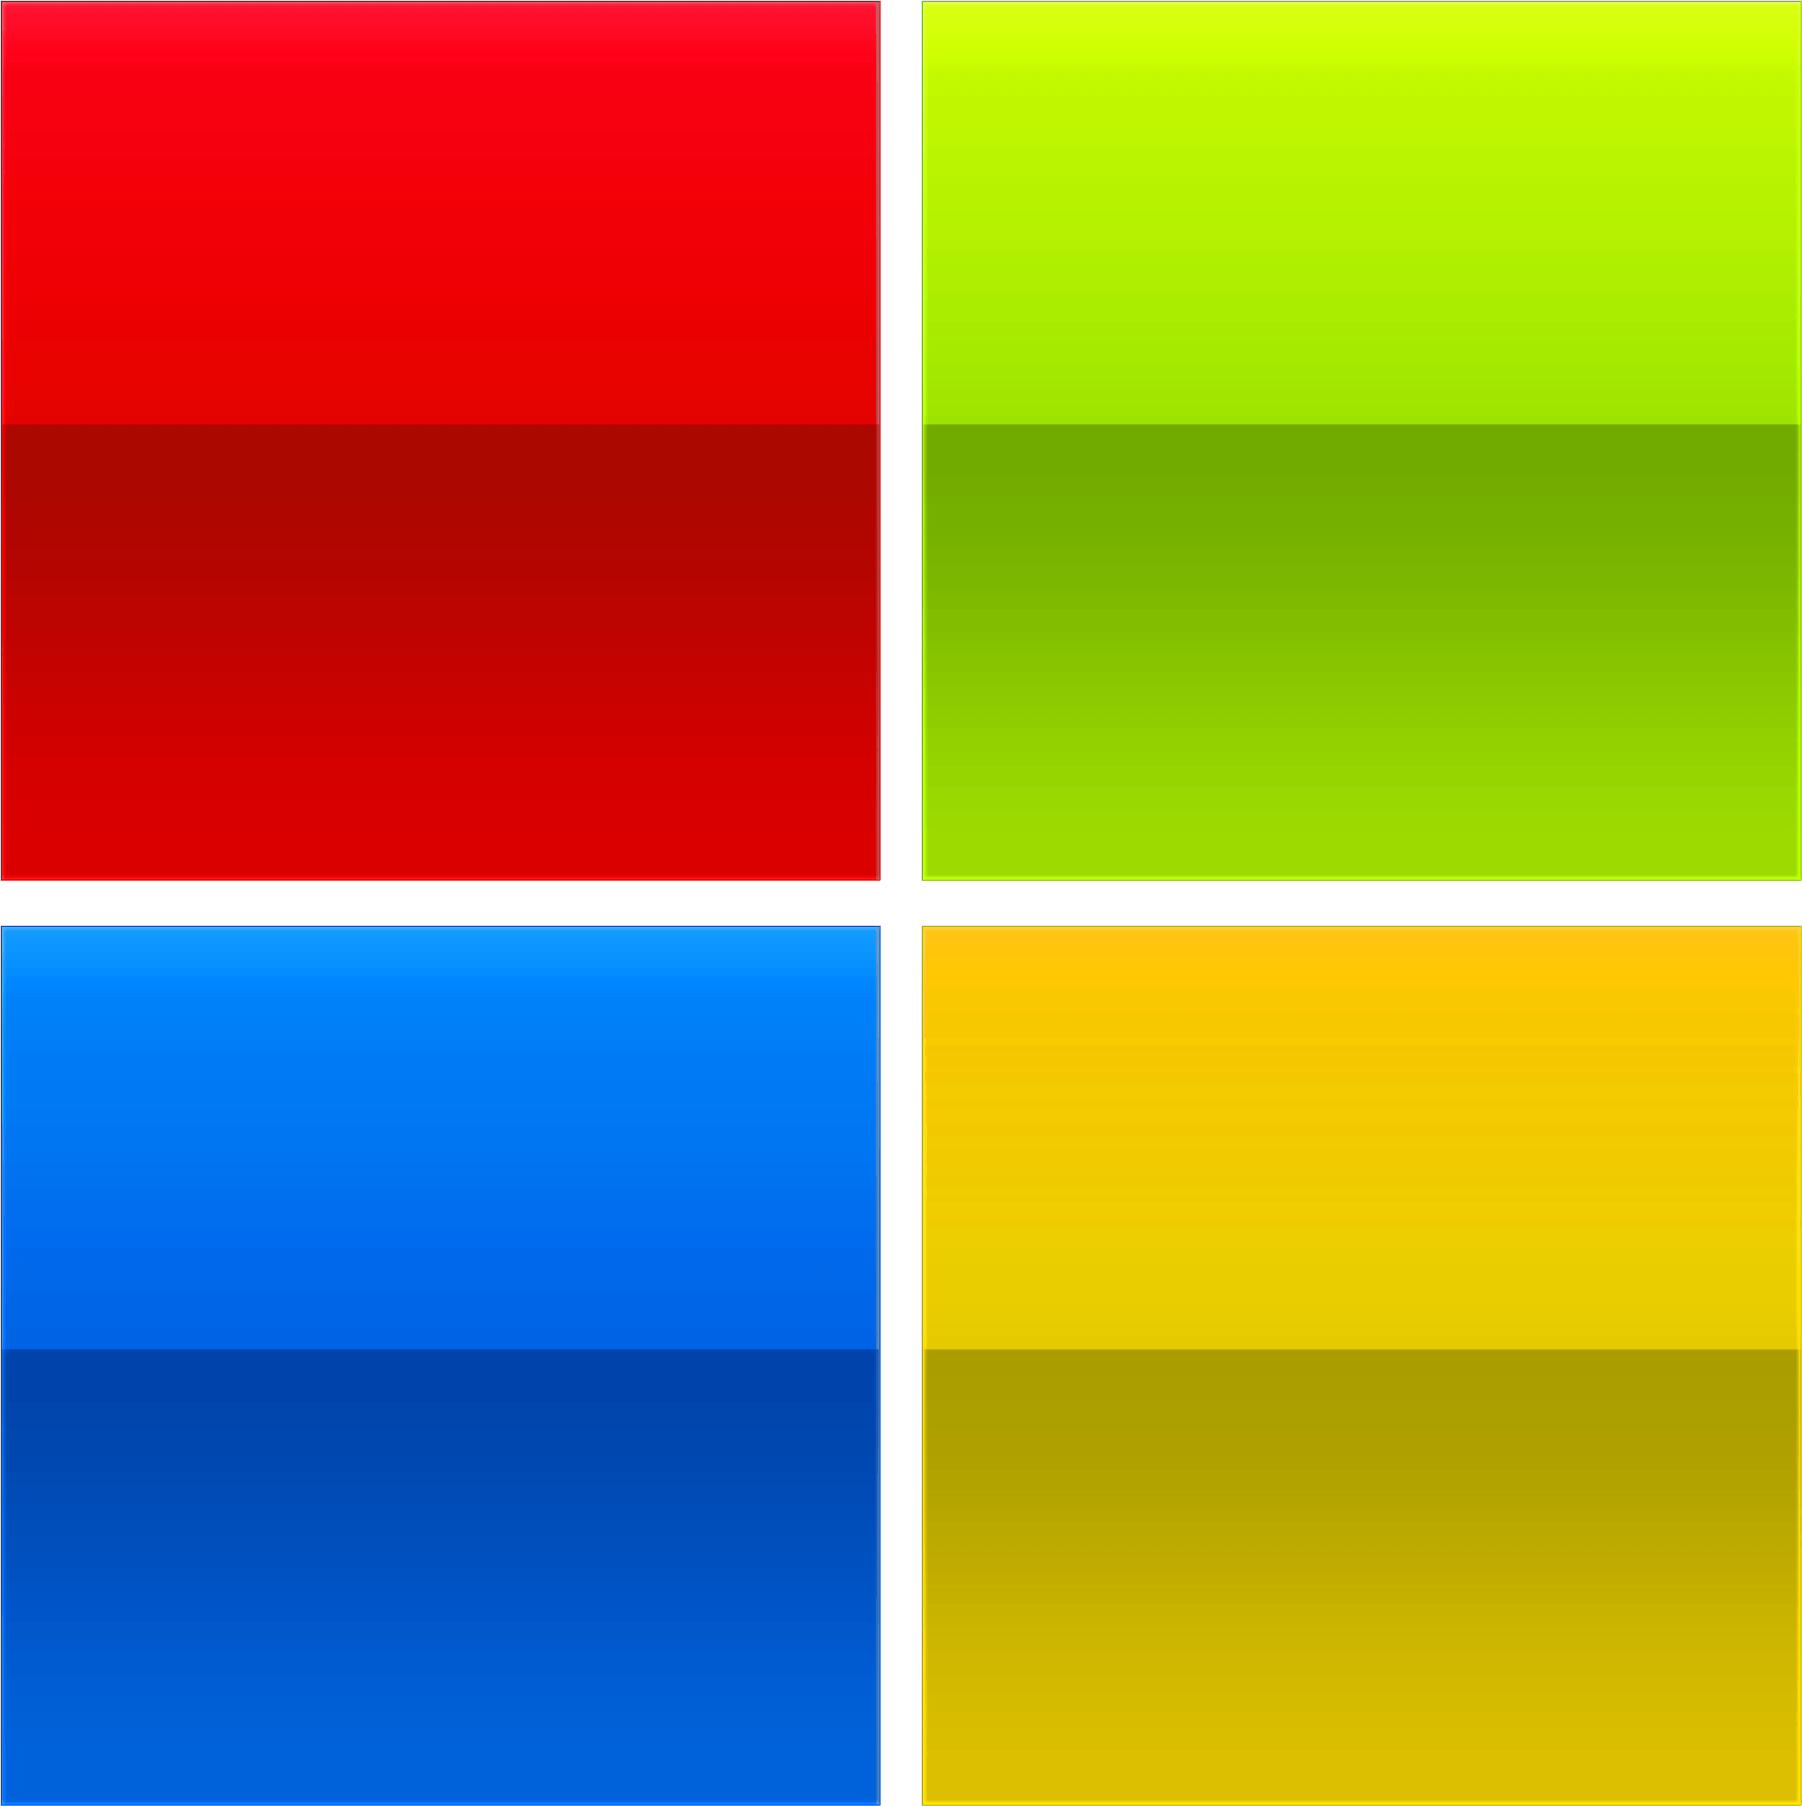 Red Windows Logo - File:Windows Squared Logo.png - Wikimedia Commons